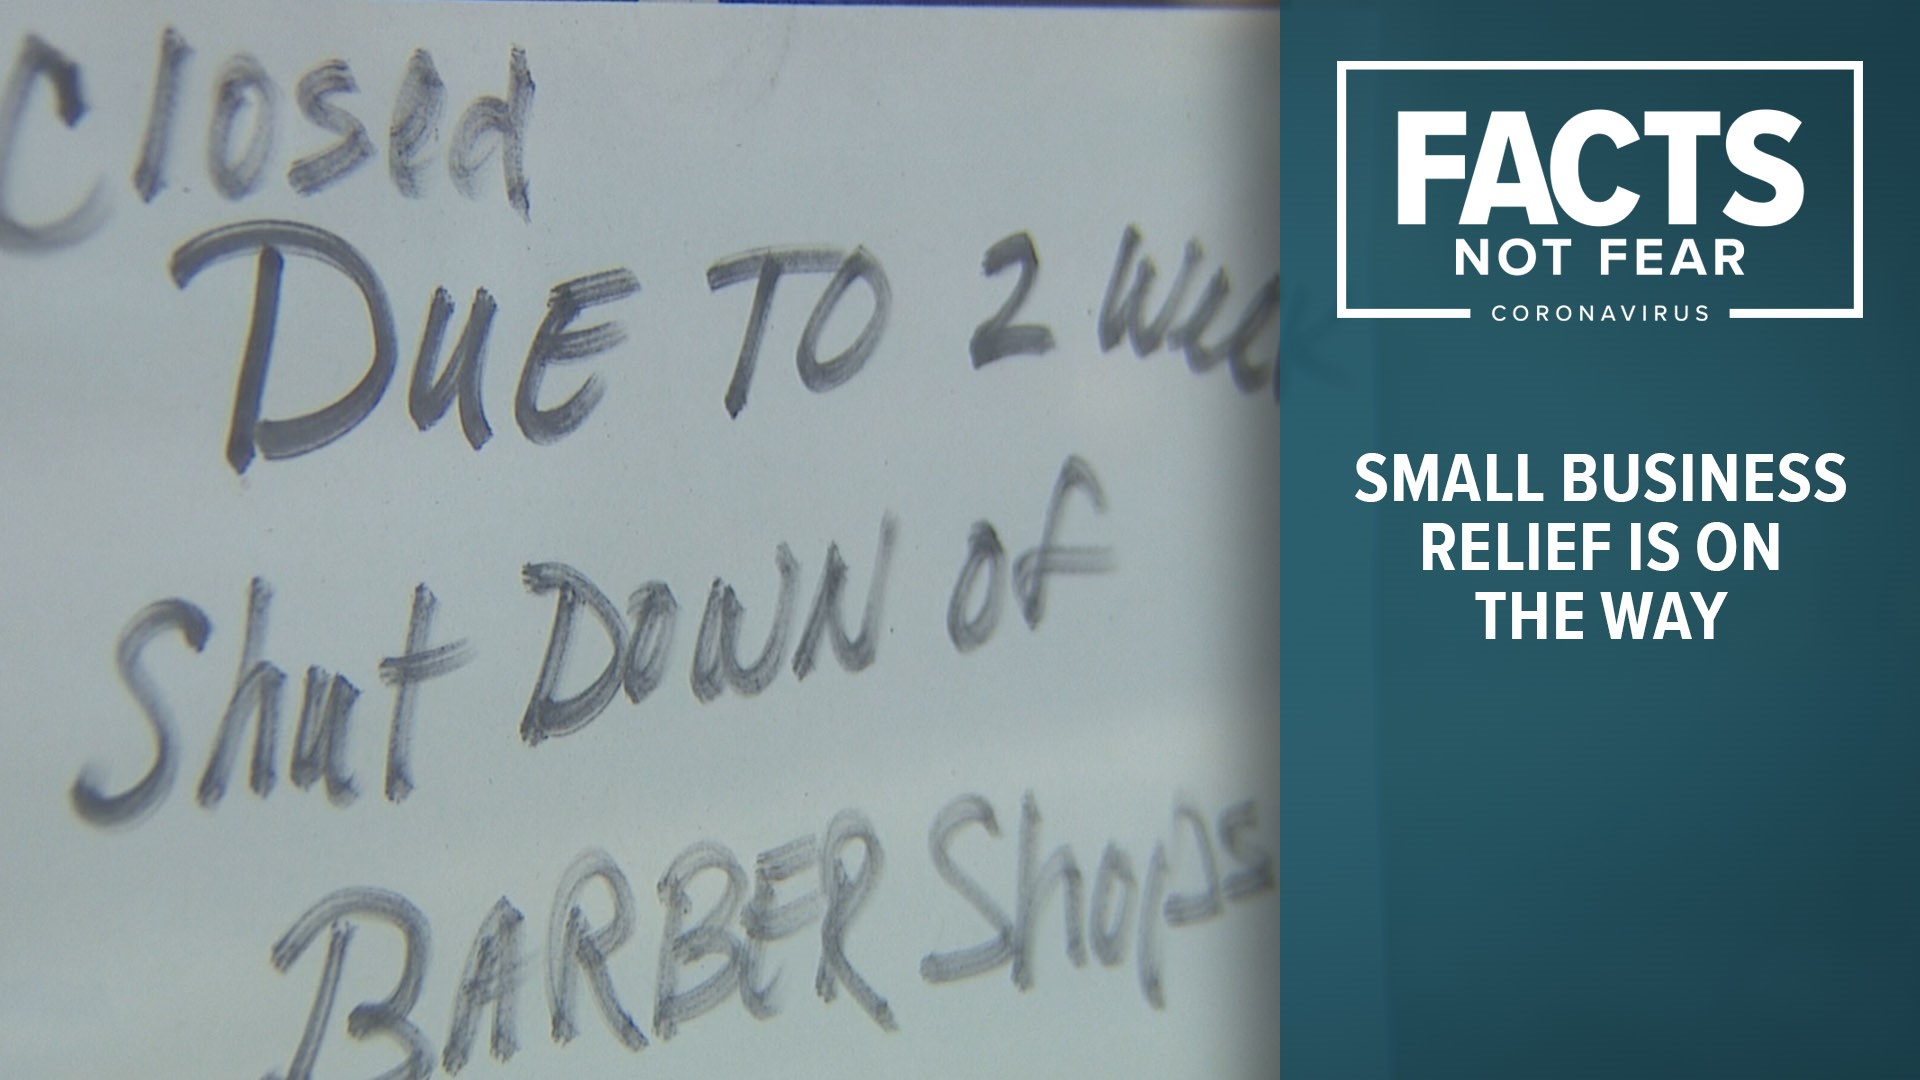 The City of Seattle is handing out 10,000 checks to struggling small business owners.